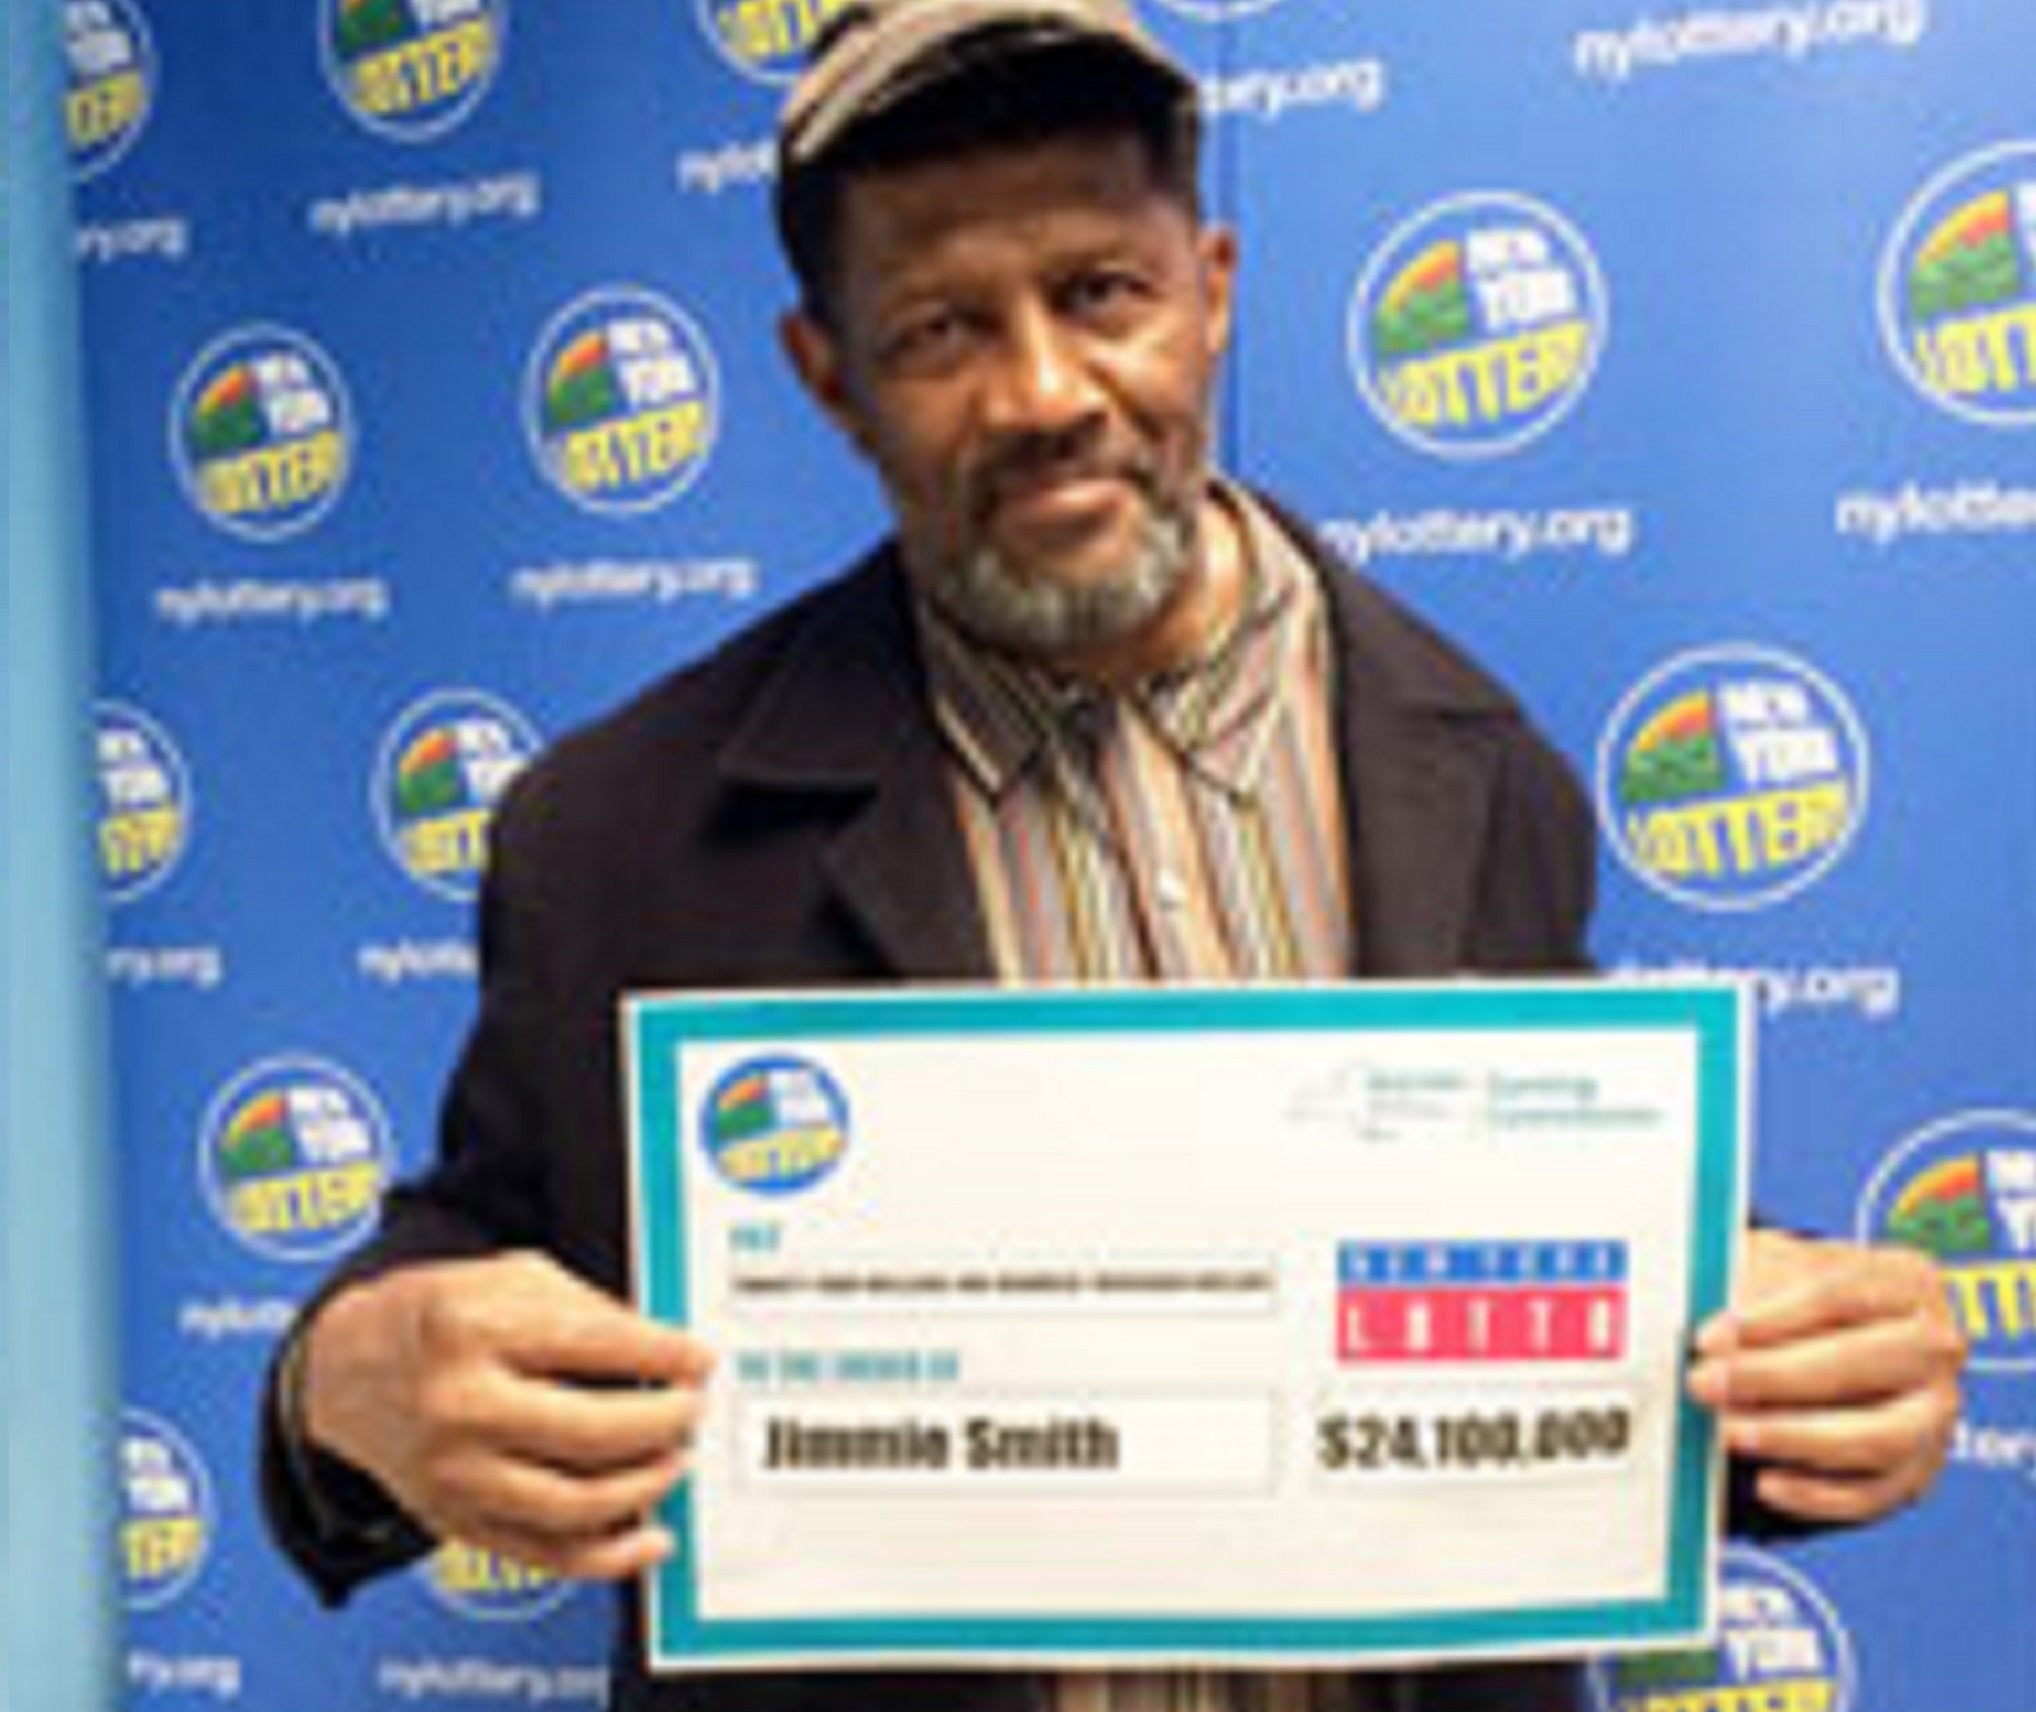 Jimmie Smith claimed $24 million two days before the prize expired